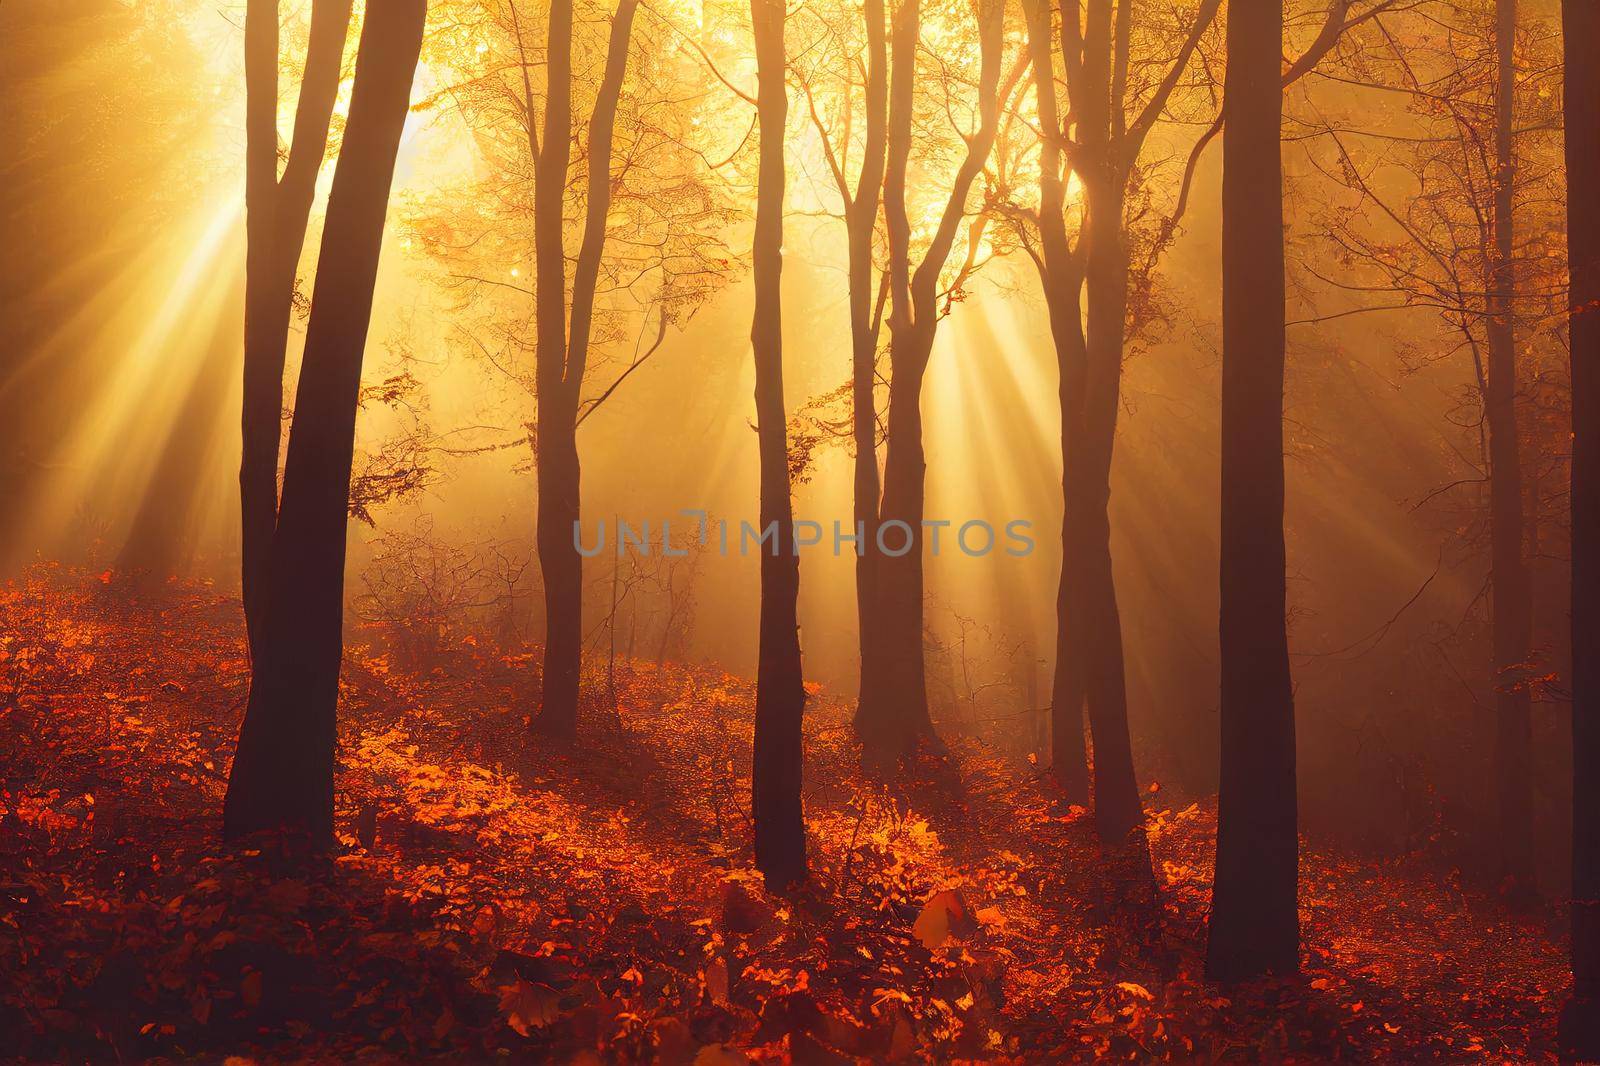 Black Forrest in Germany. Orange Evening Sun shines through the golden foggy forest Woods. Magical Autumn Forrest. Colorful Fall Leaves. Romantic Background. Sunrays before Sunset. Landscape format. High quality illustration